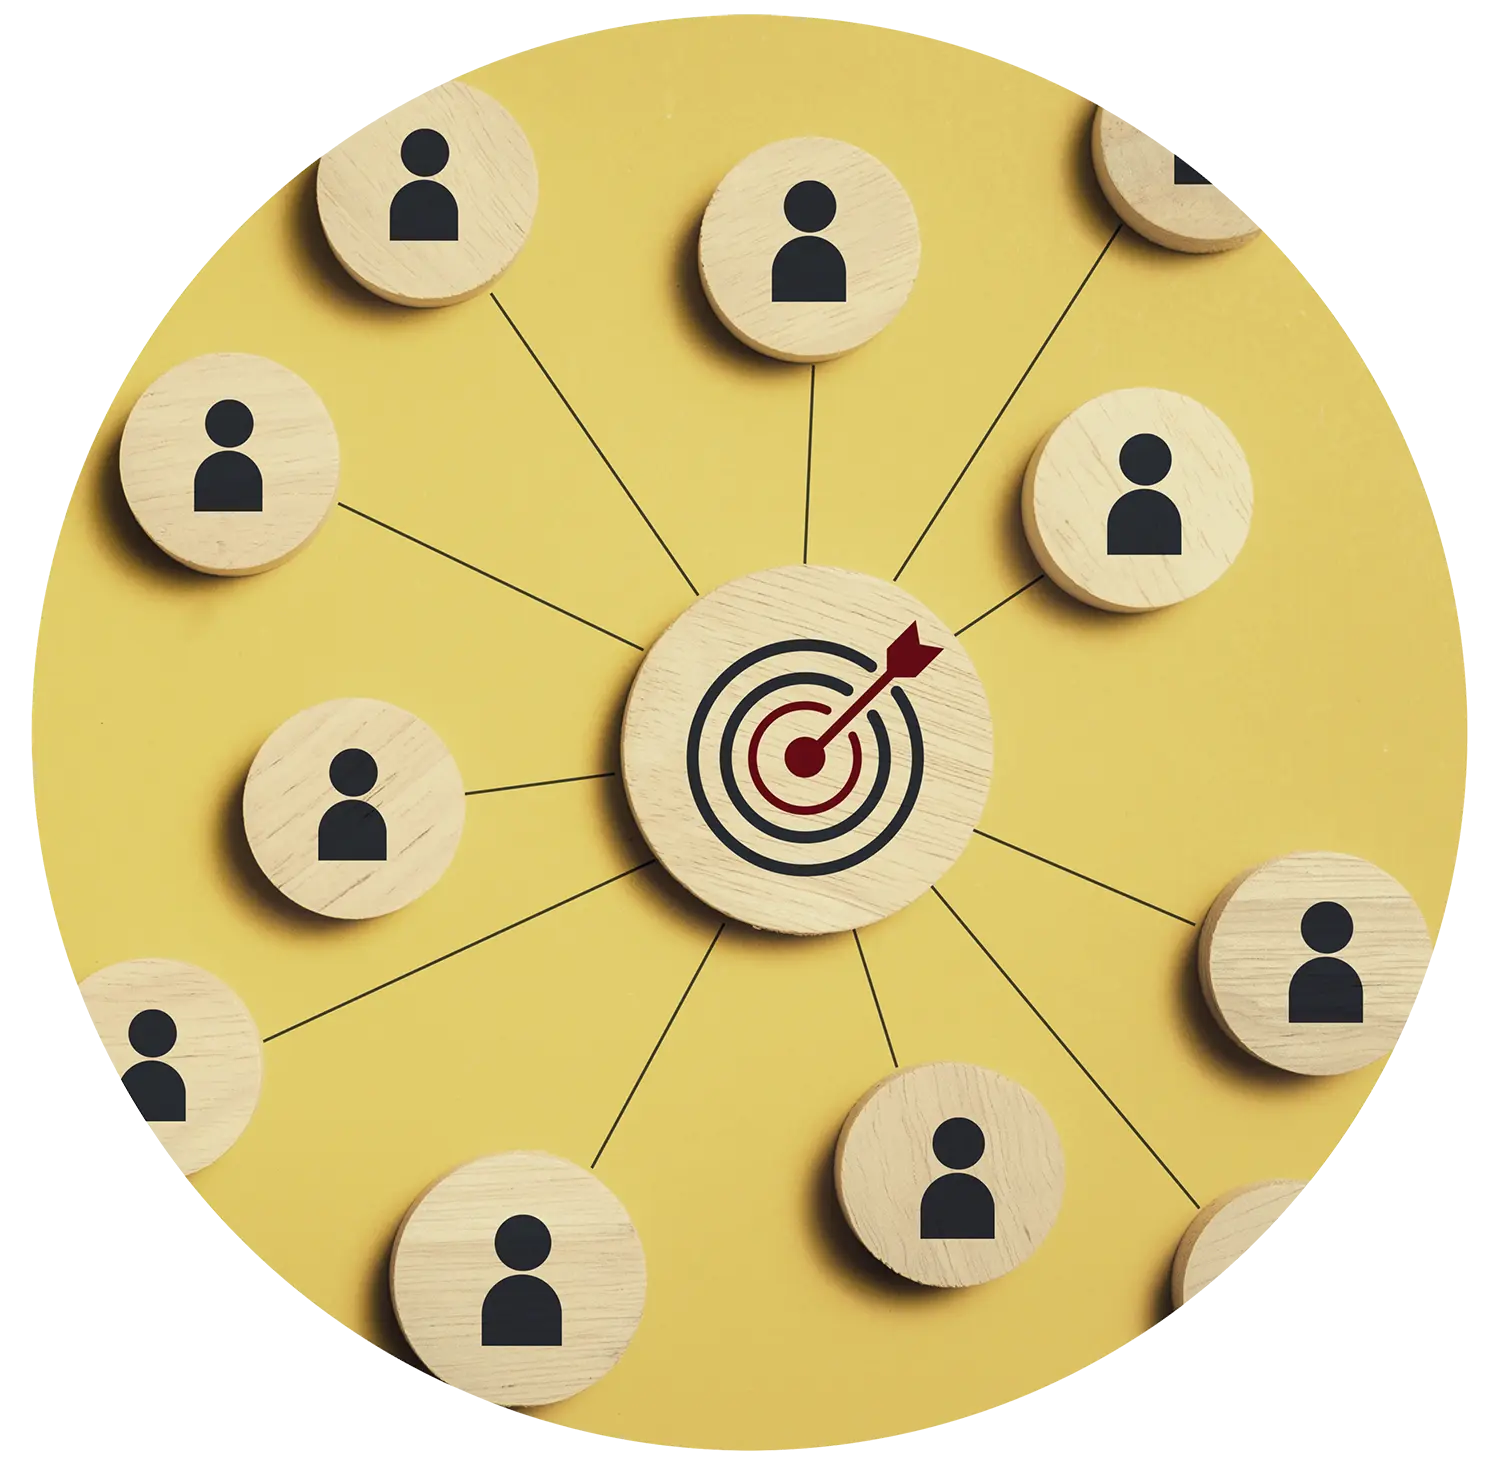 Image of a Circle with Customer Outlines  Connecting to a Target in the Center